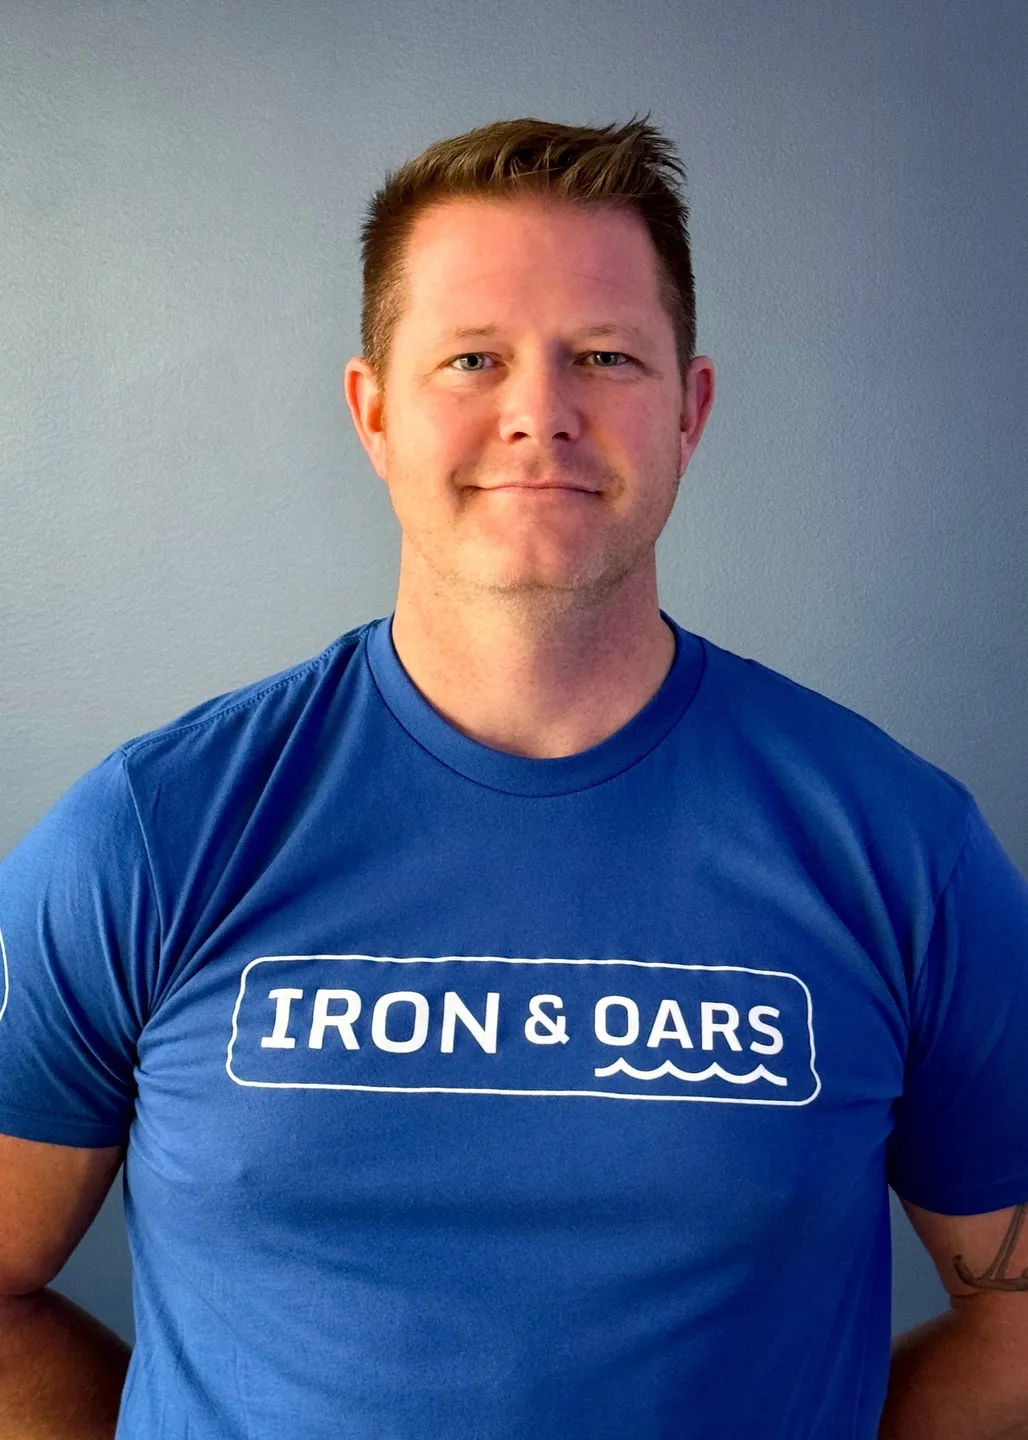 A man wearing a blue shirt with the words " iron & oars ".